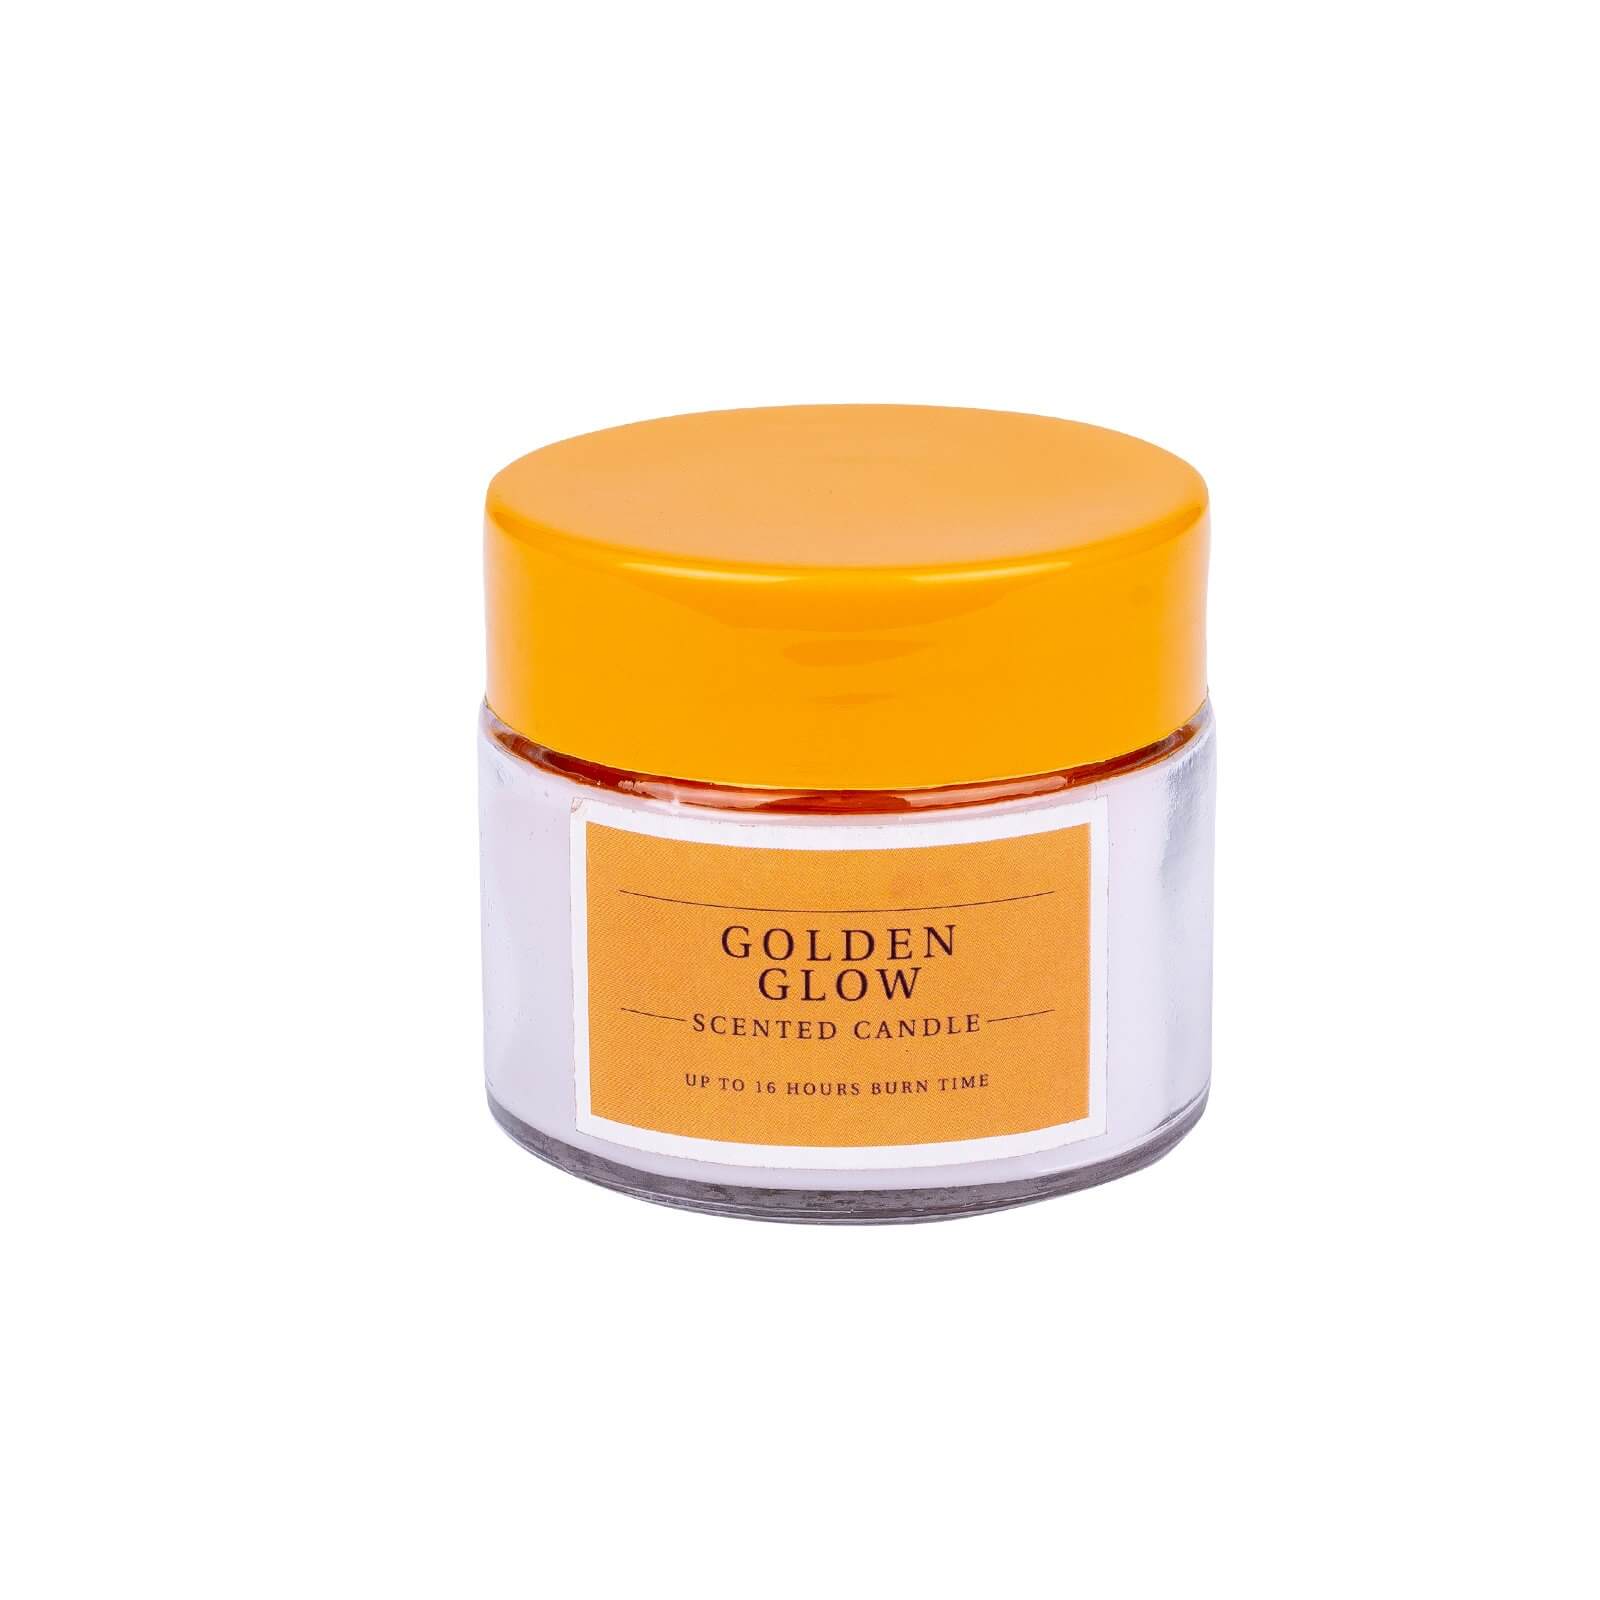 Golden Glow Scented Candle